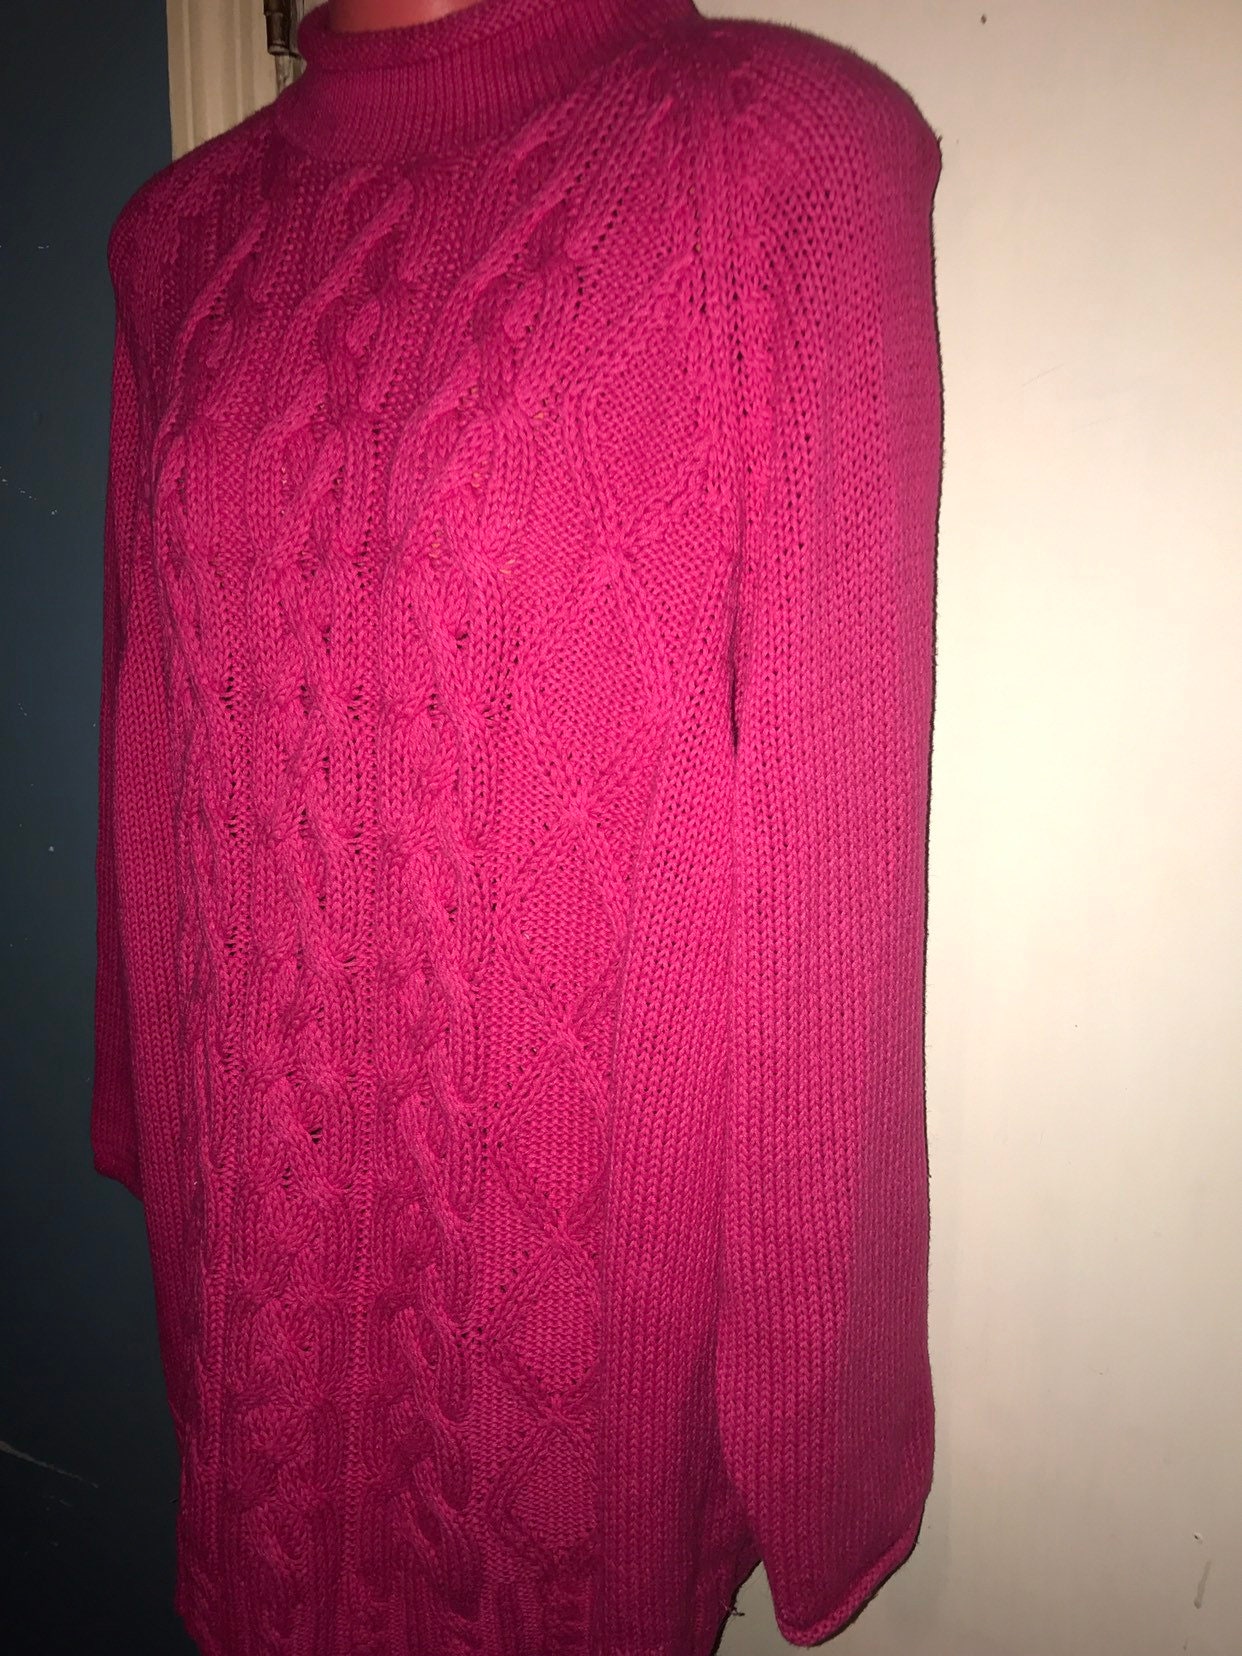 Vintage Pink Forenza Sweater. Vintage 80's Sweater. Pink Sweater ...